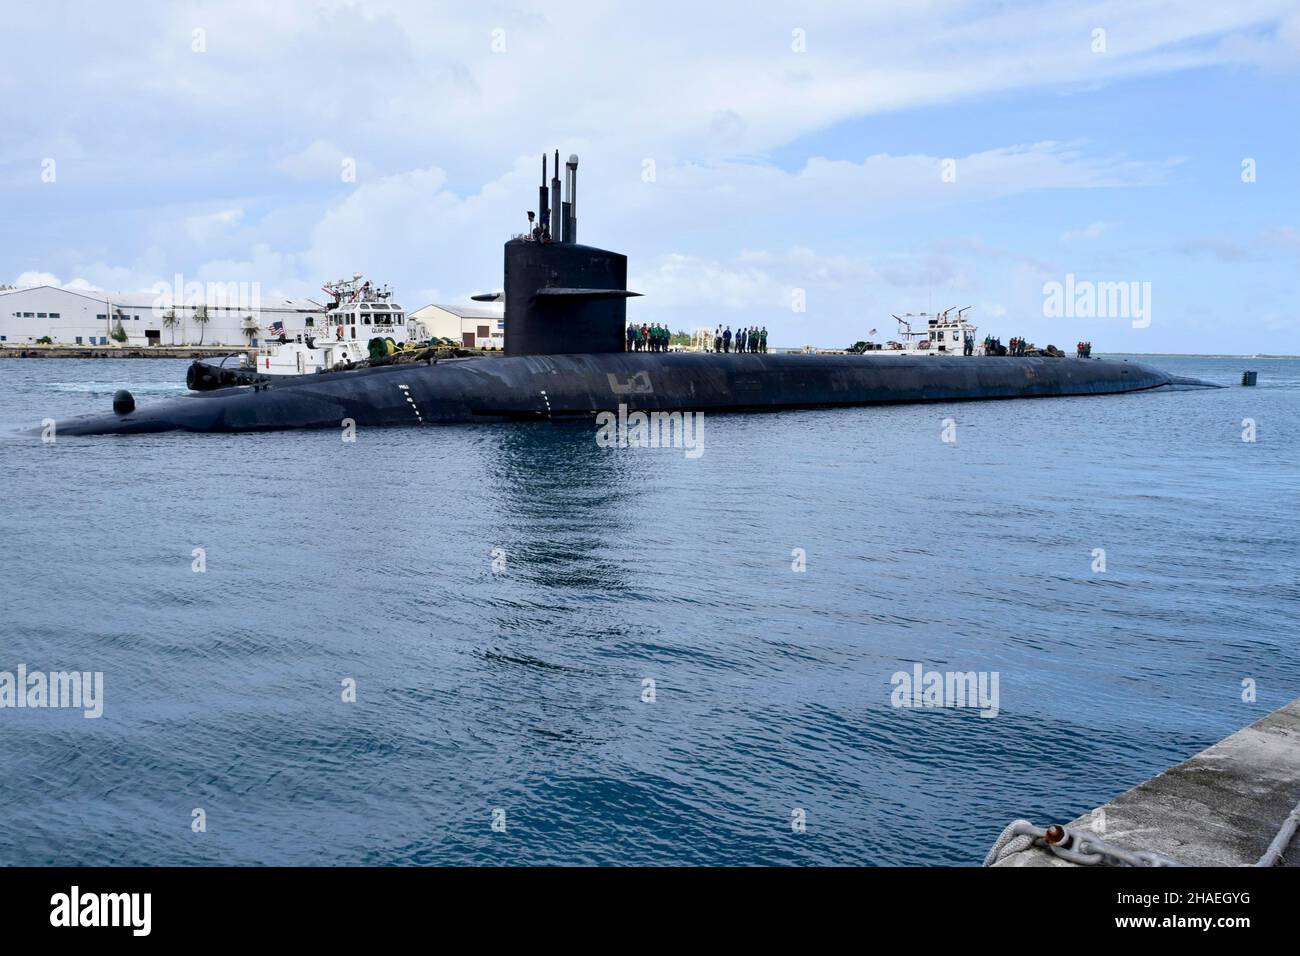 Apra Harbor, United States. 30 October, 2016. The U.S. Navy nuclear-power Ohio-class ballistic missile submarine USS Pennsylvania prepares to moor for a port visit October 31, 2016 in Apra Harbor, Guam. Credit: Seaman Daniel Willoughby/U.S. Marines/Alamy Live News Stock Photo